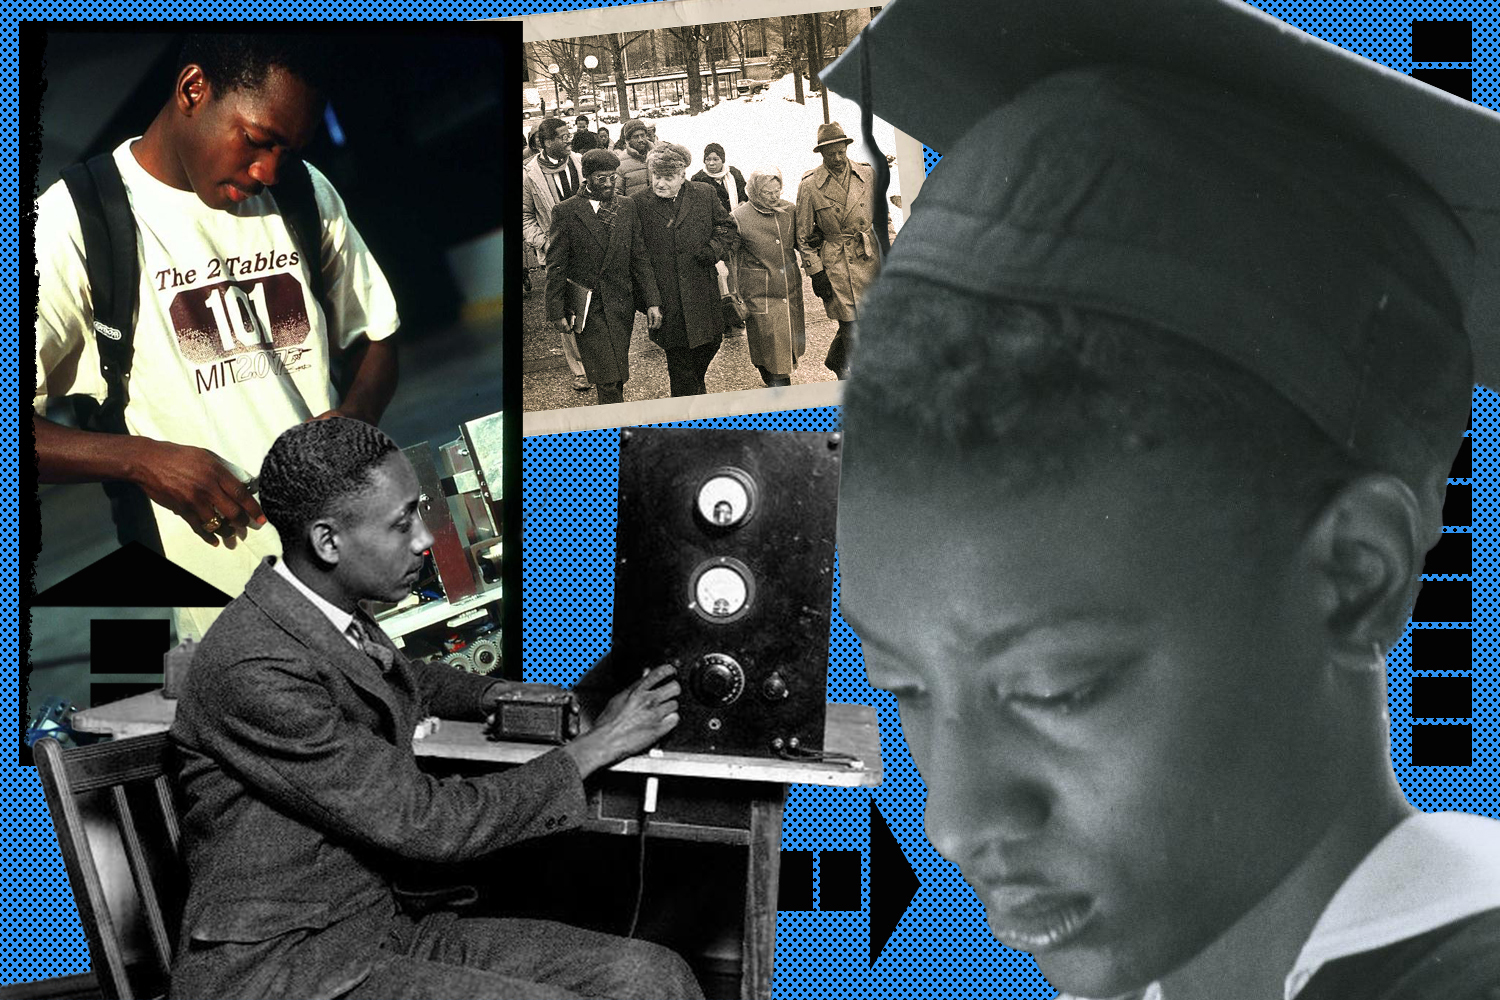 The MIT Black History Project is an ongoing collaborative research effort sponsored by the MIT Office of the Provost working to archive 150+ years of the black experience at MIT.